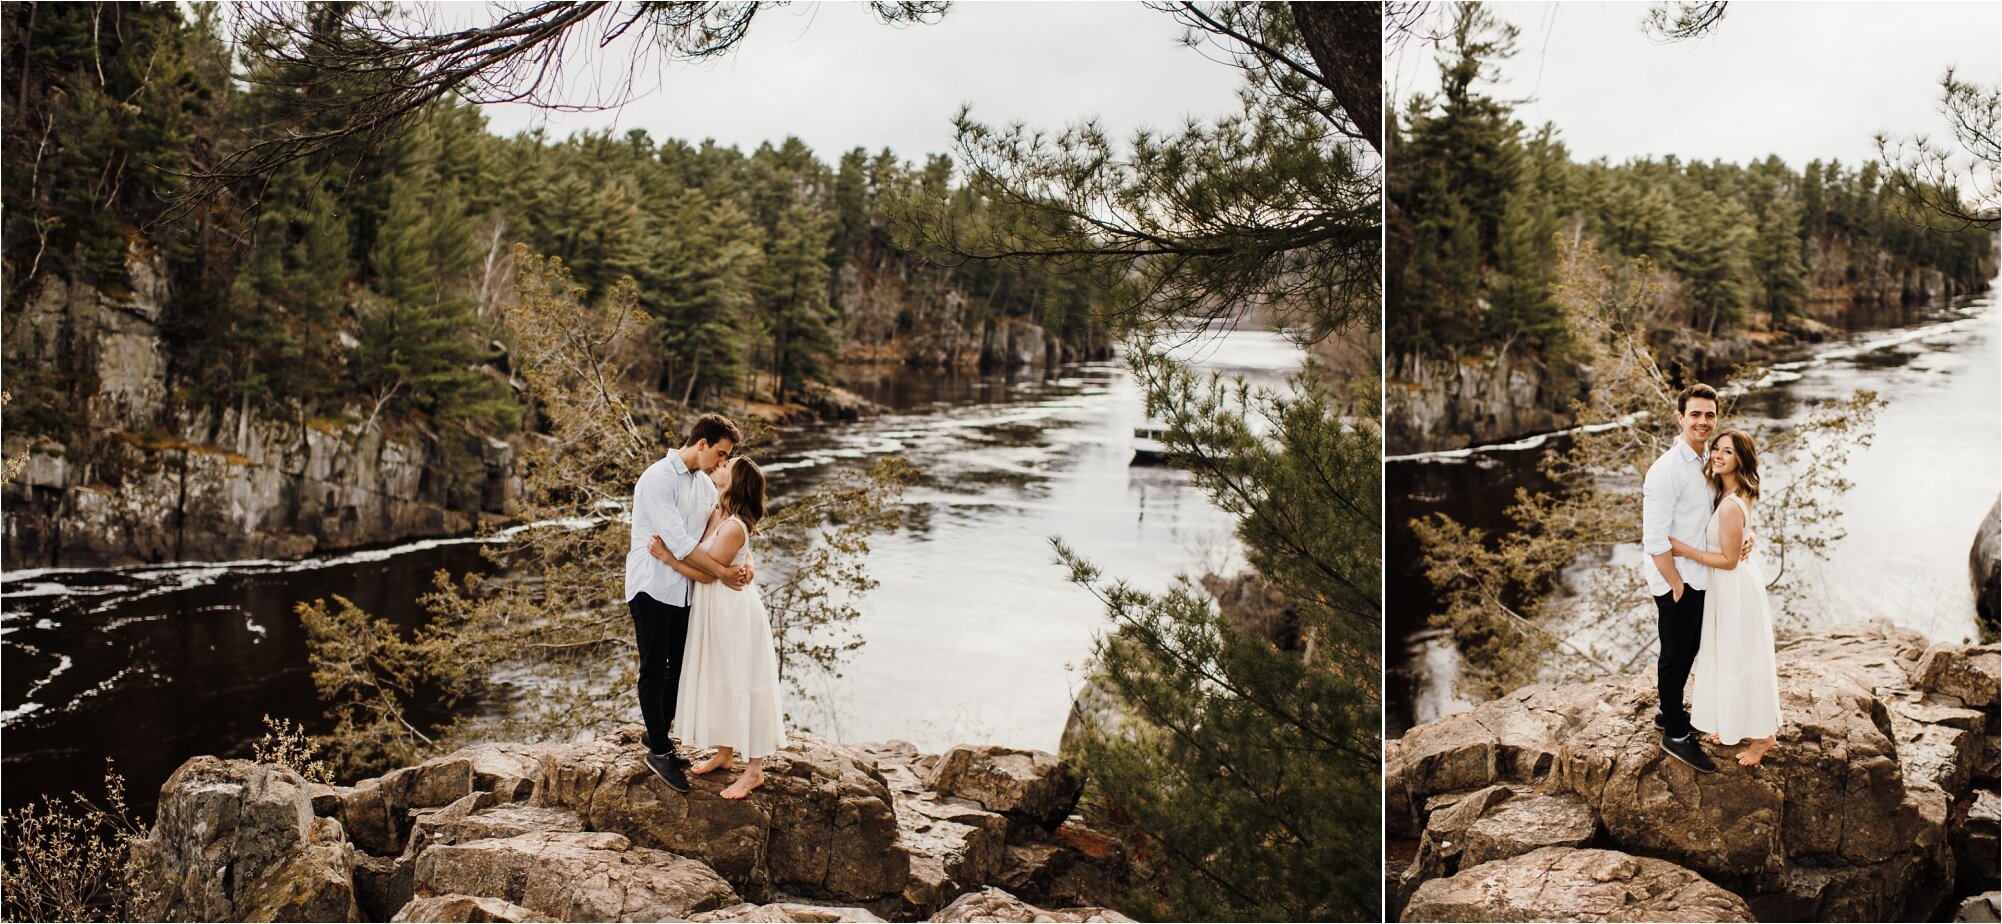  engagement session along st criox river in taylors falls minnesota photography 